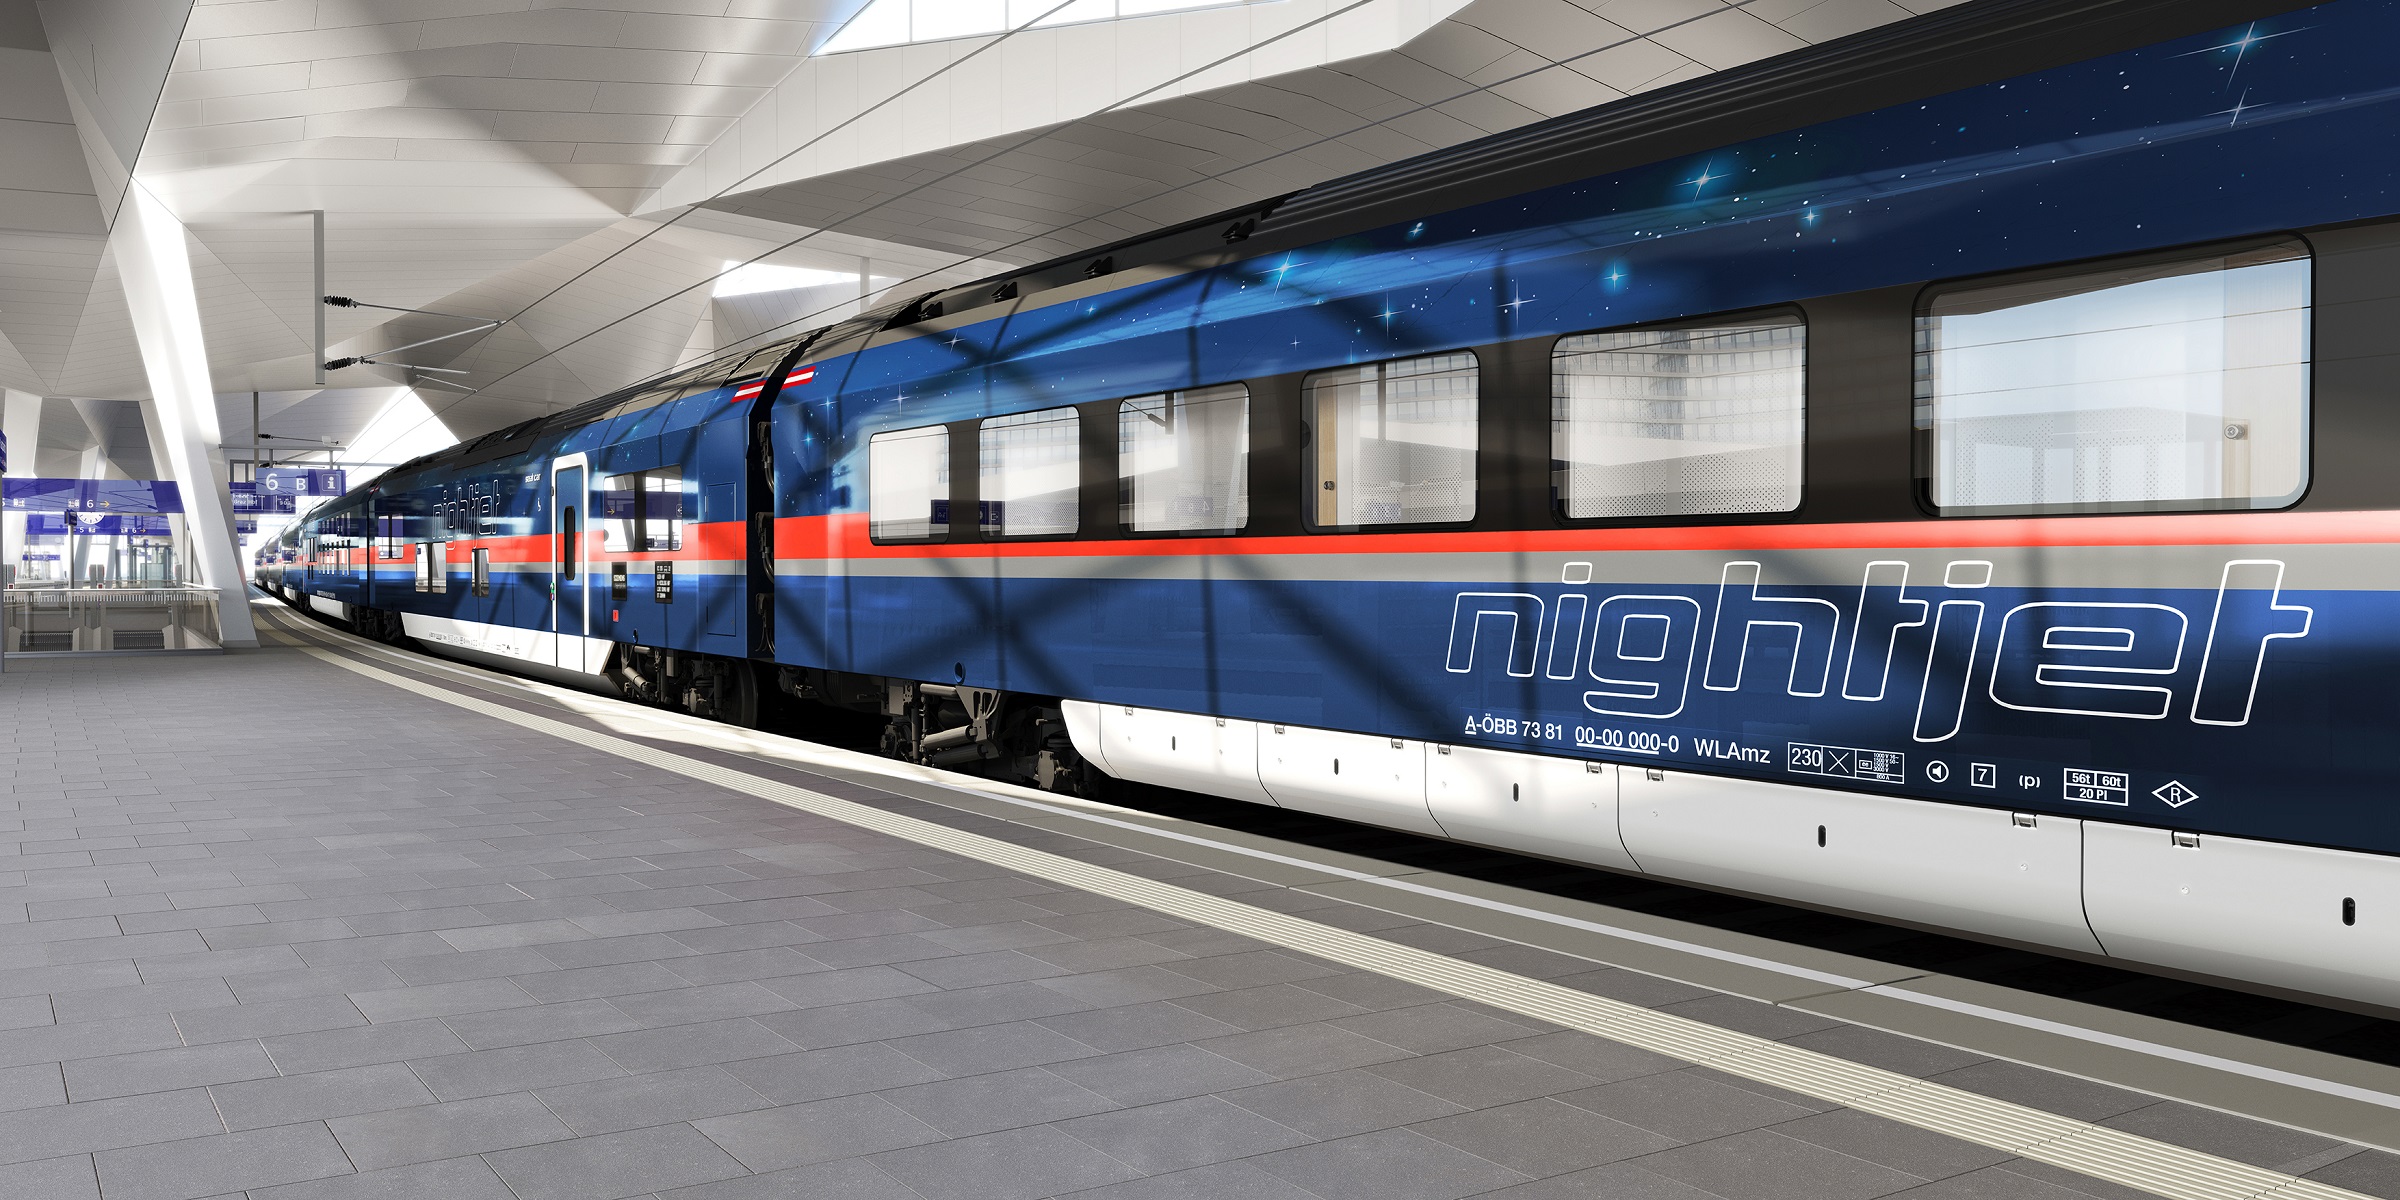 Austrian Federal Railways (ÖBB) is investing in the new generation of Nightjet trains, which will offer passengers an even more comfortable nightime travel experience.  They are being developed and built at the Siemens Mobility plant in Vienna. The first Nightjet car body and exterior design was presented at a virtual press conference in February 2021